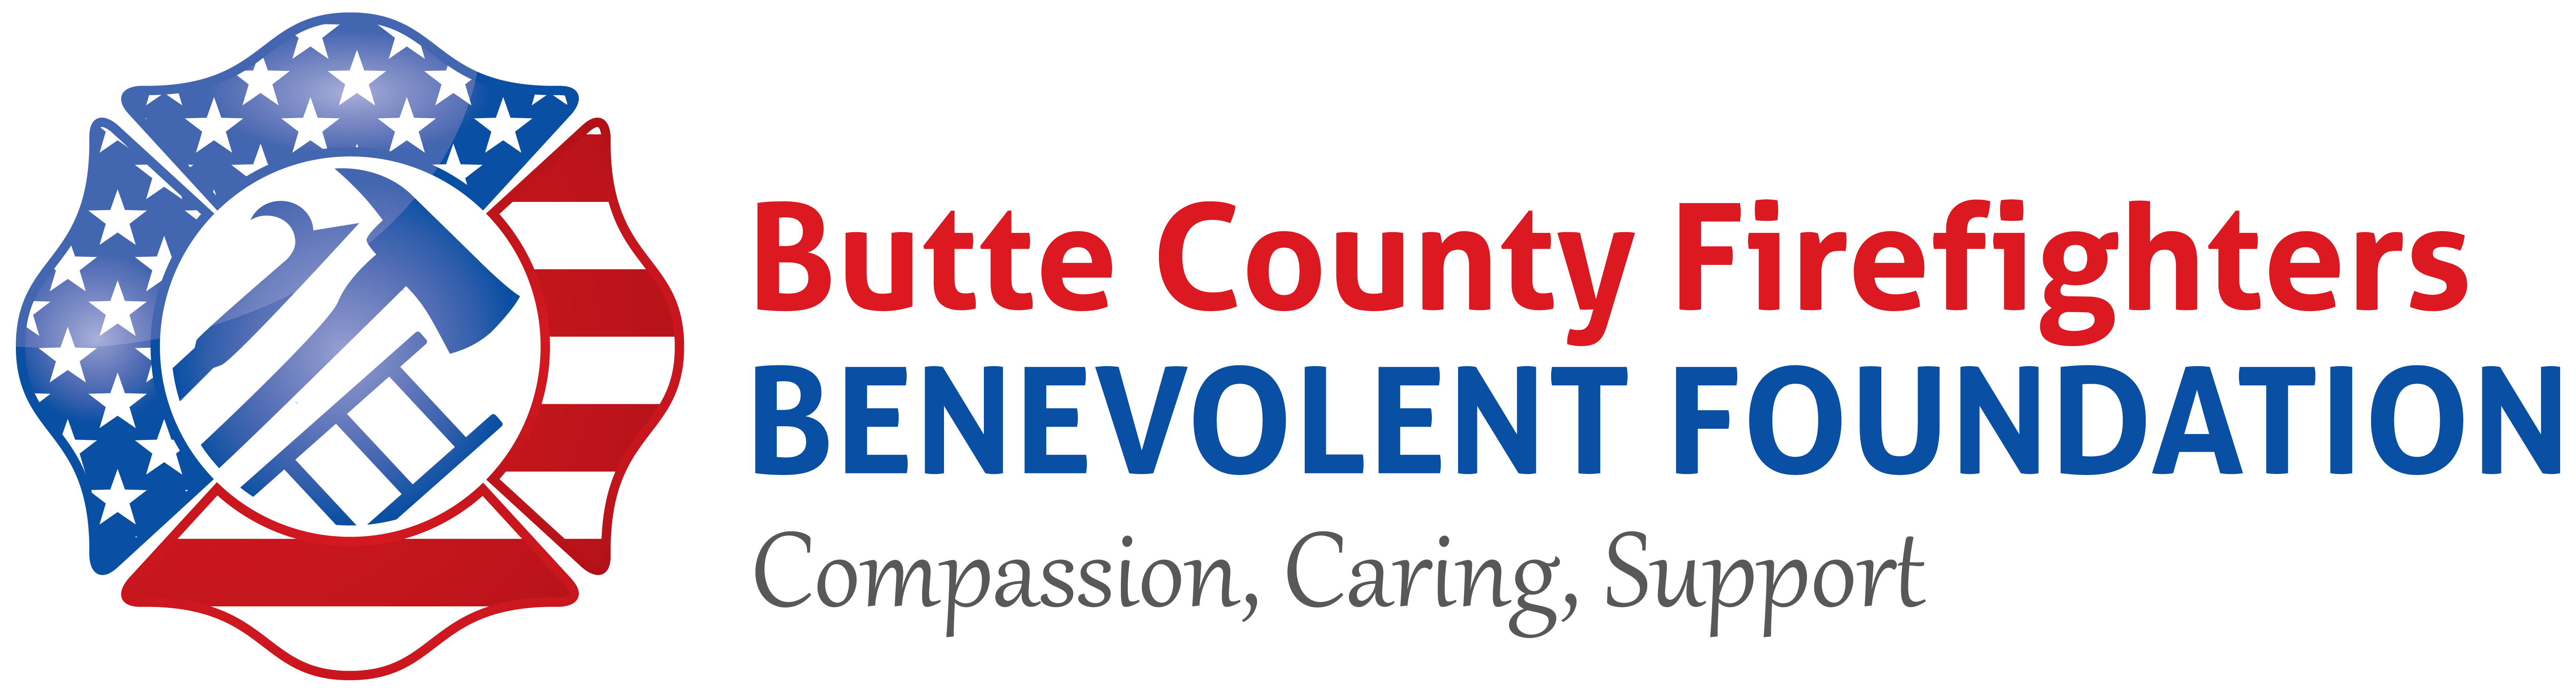 Butte County Firefighters Benevolent Foundation